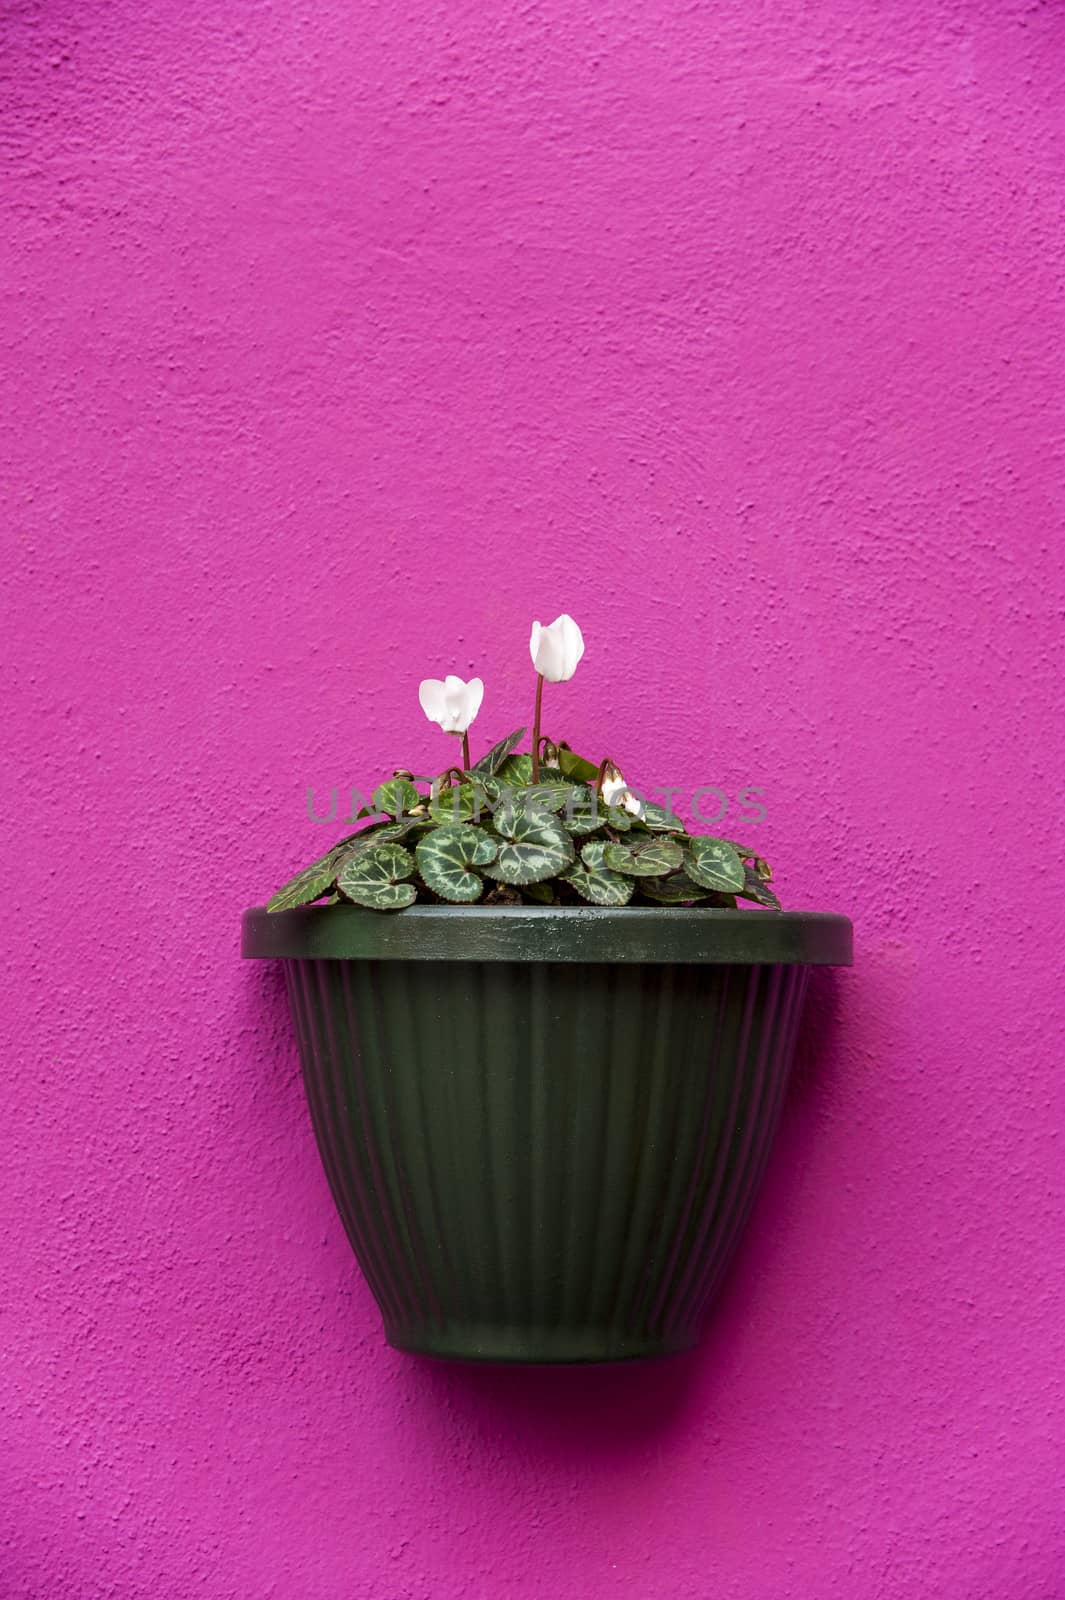 Vase on a violet wall by cla78